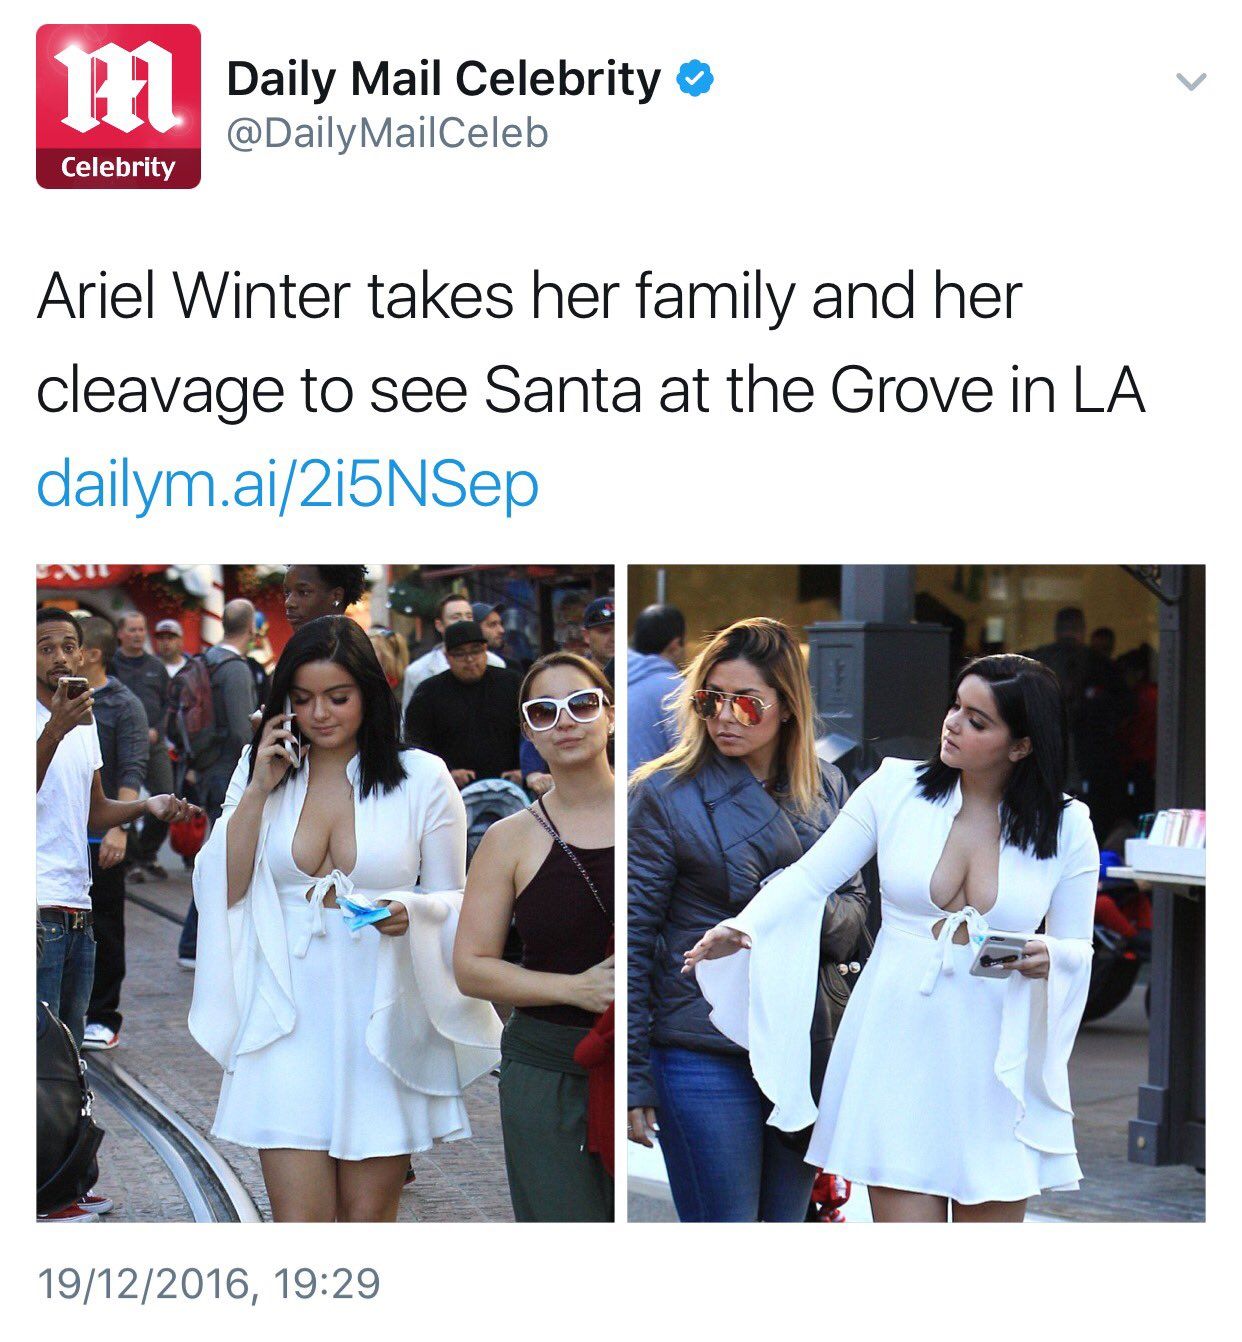 Daily Mail Celebrity